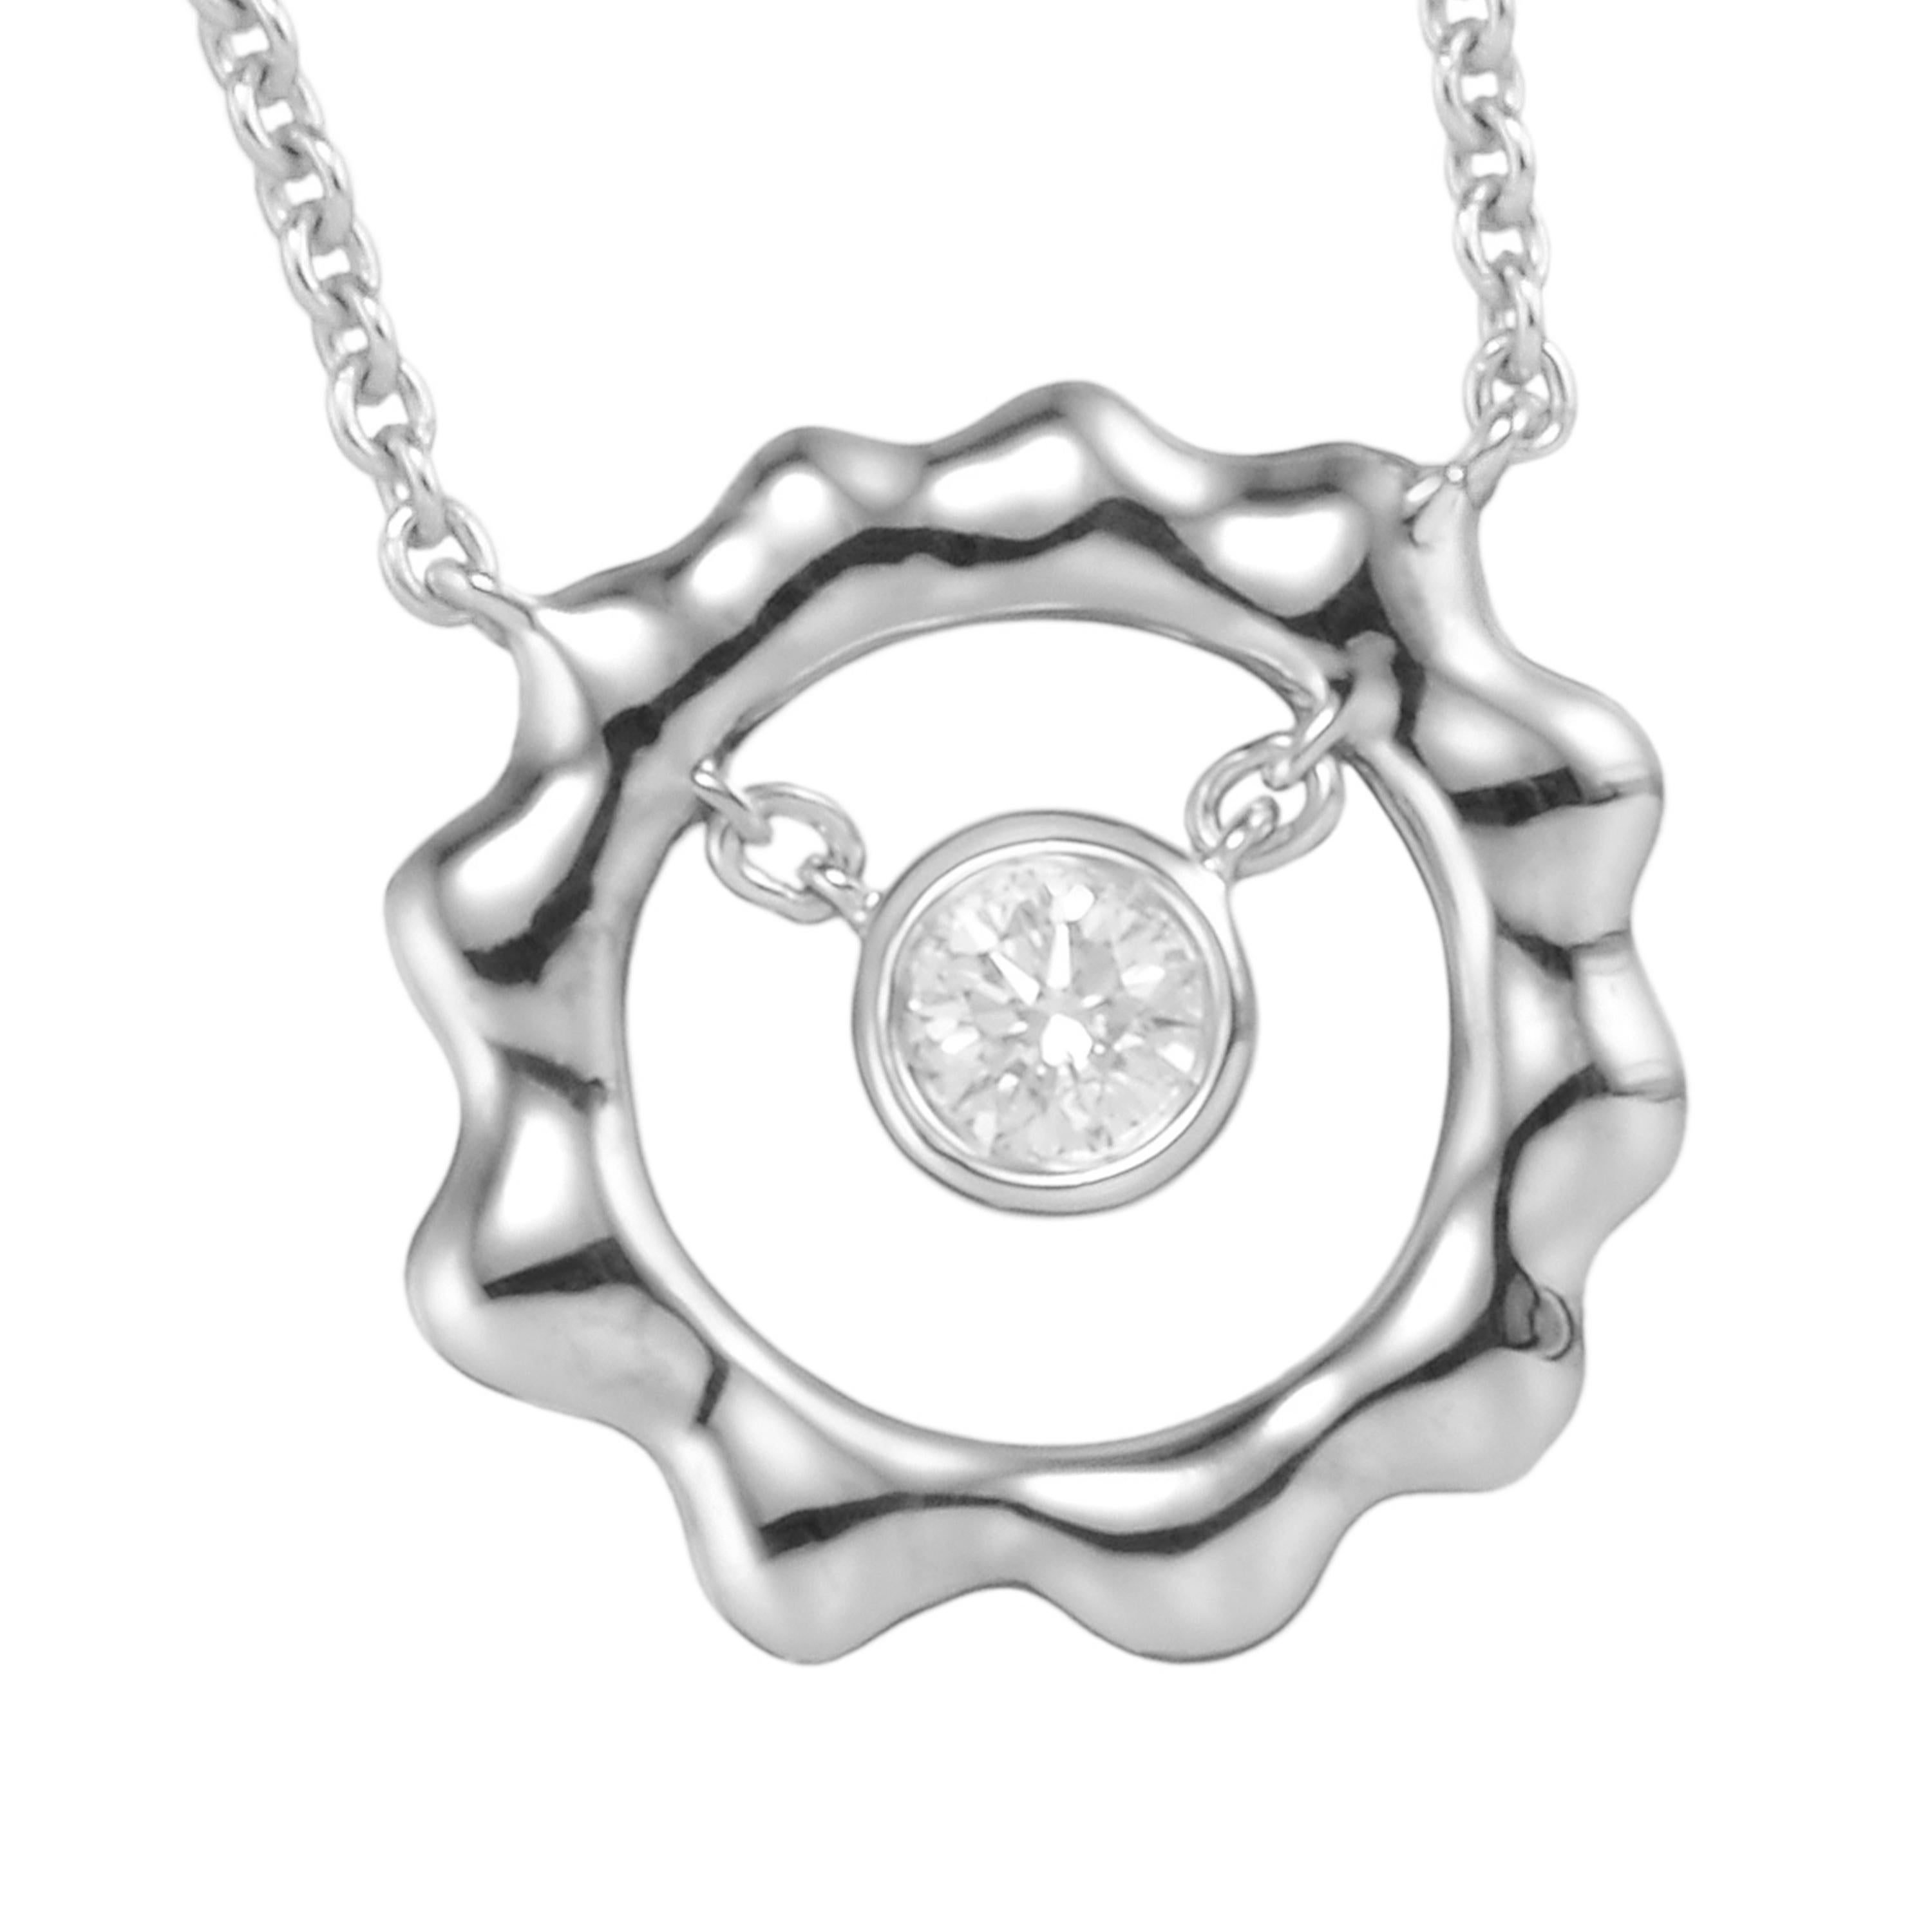 Cast in the shape of the sun, Butani's pendant necklace is handcrafted from 18-karat white gold and has a 0.28 carat brilliant-cut round diamond center illuminated by a white gold sun silhouette.  Wear it solo or layered with other pieces.  Chain